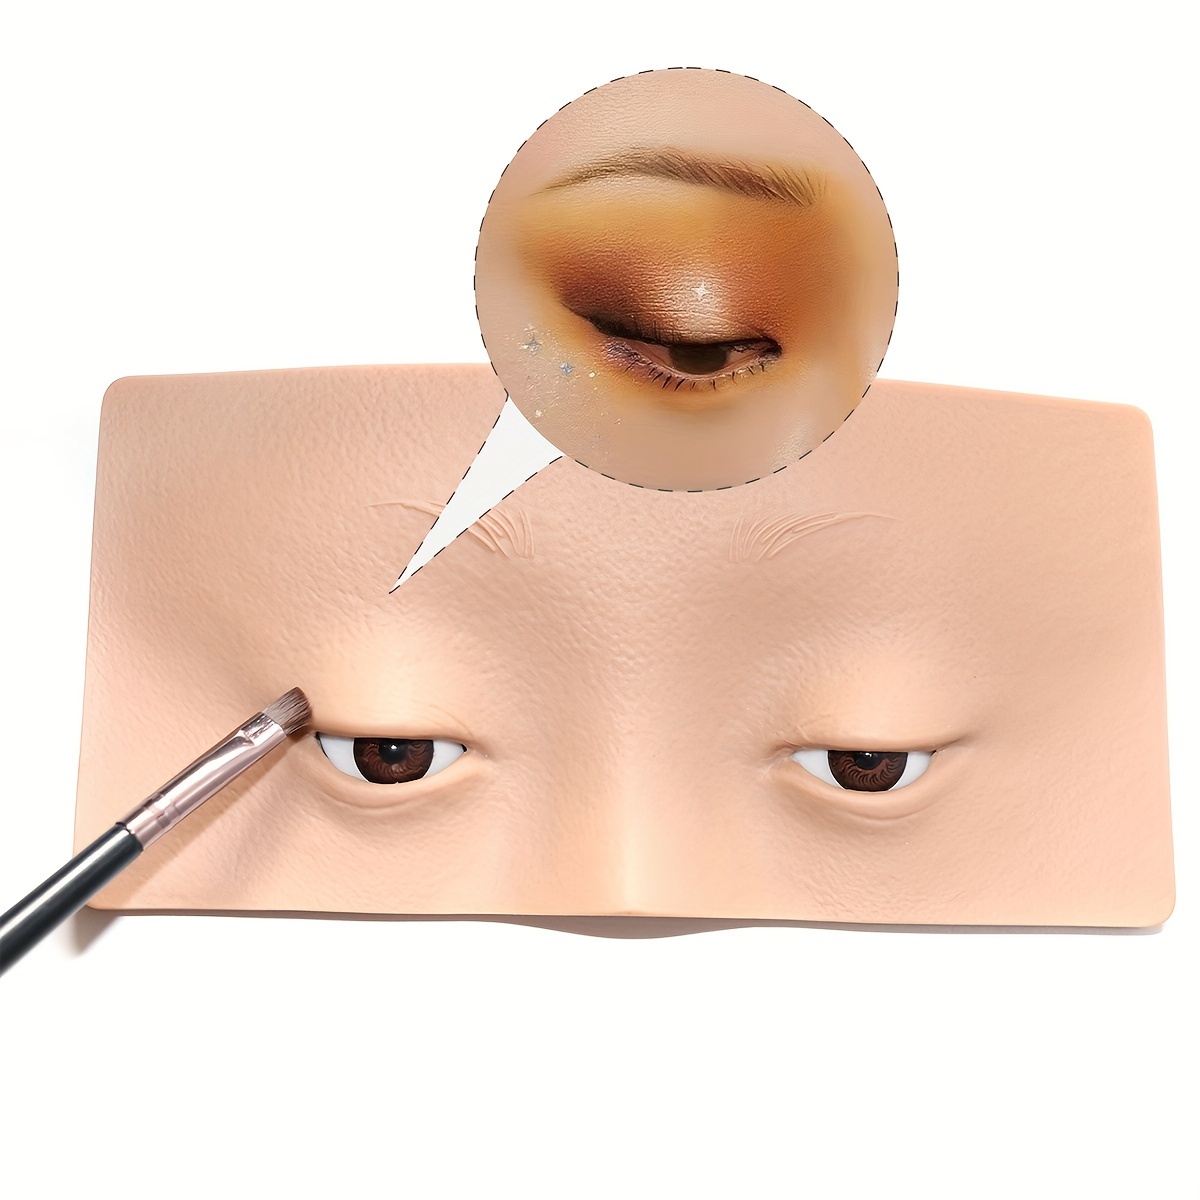 lash Mannequin Head - Face Eyes Makeup Mannequin Silicone False for Lash Practice  Makeup Perfect Aid To Practicing Makeup, Silicone Fake Skins for Artists  and Makeup Beginners 